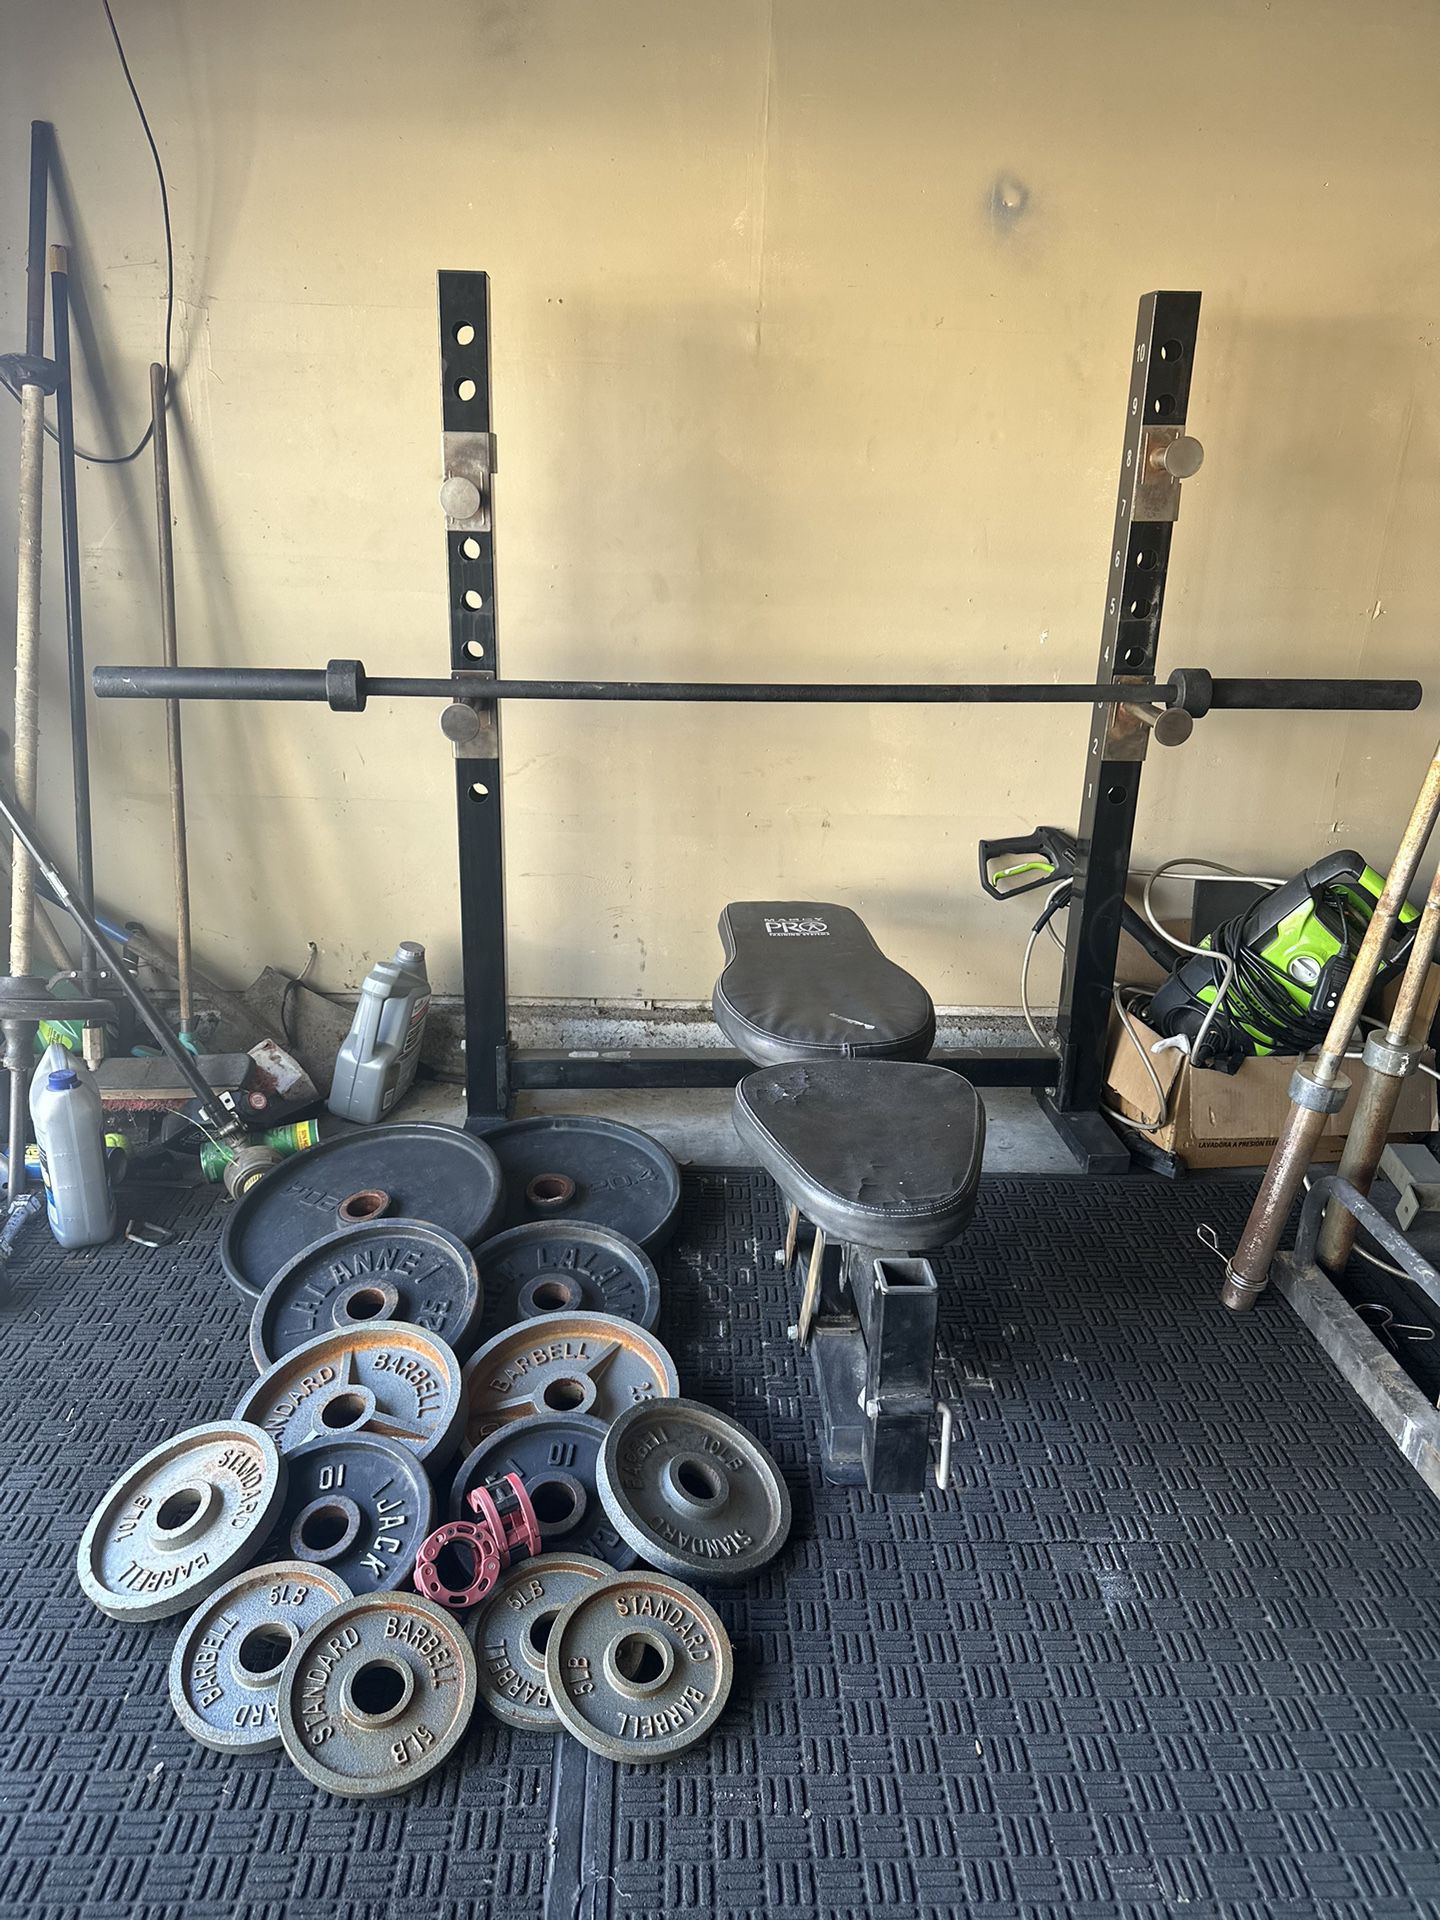 Bench press/ squat rack with 7ft 45lbs bar with 250lbs of Olympic weights plus curl bar